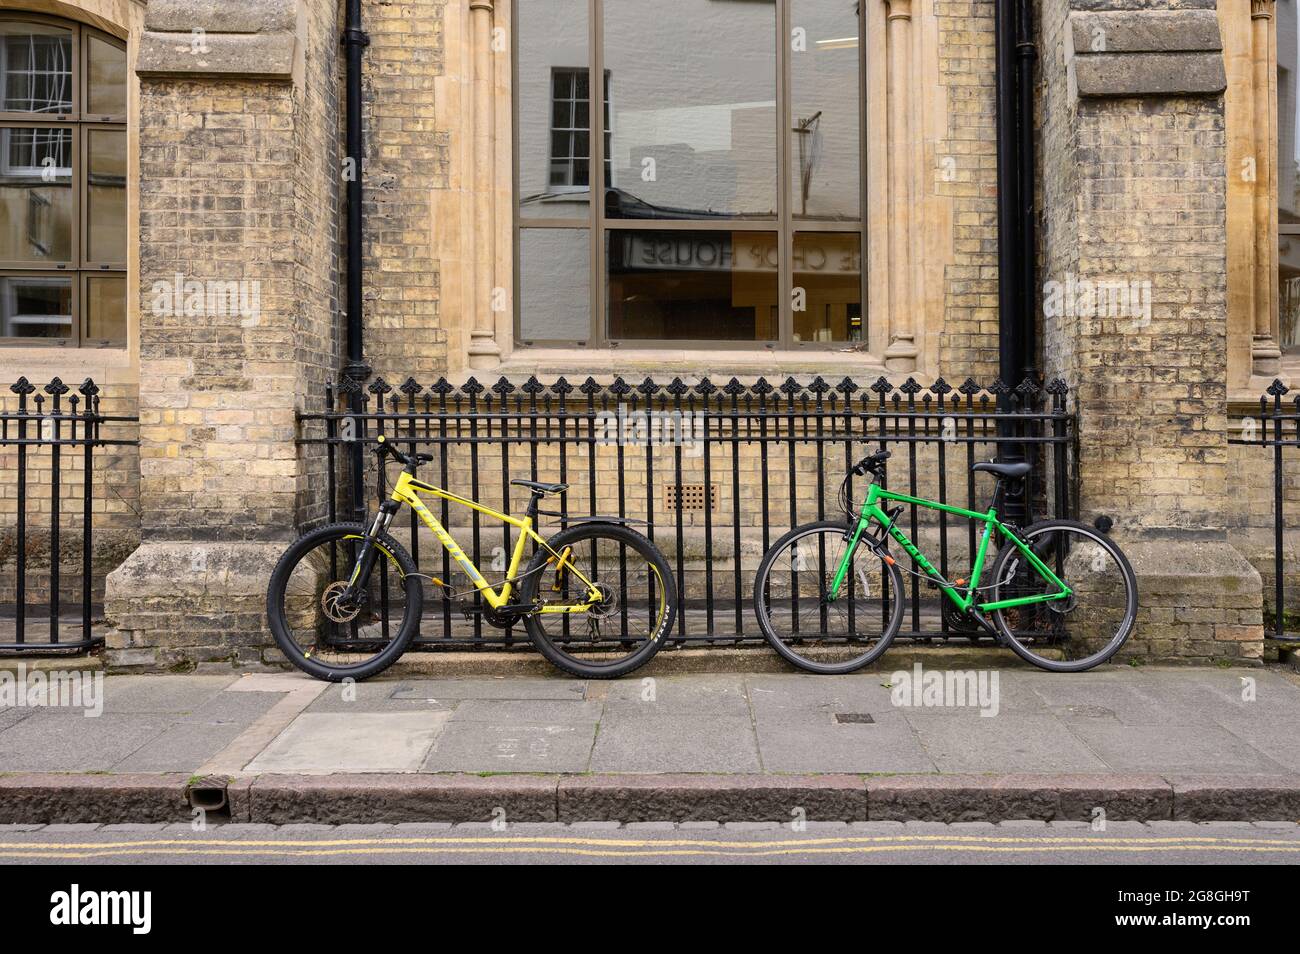 A yellow bike and a green bike locked to railings in a city centre. Stock Photo